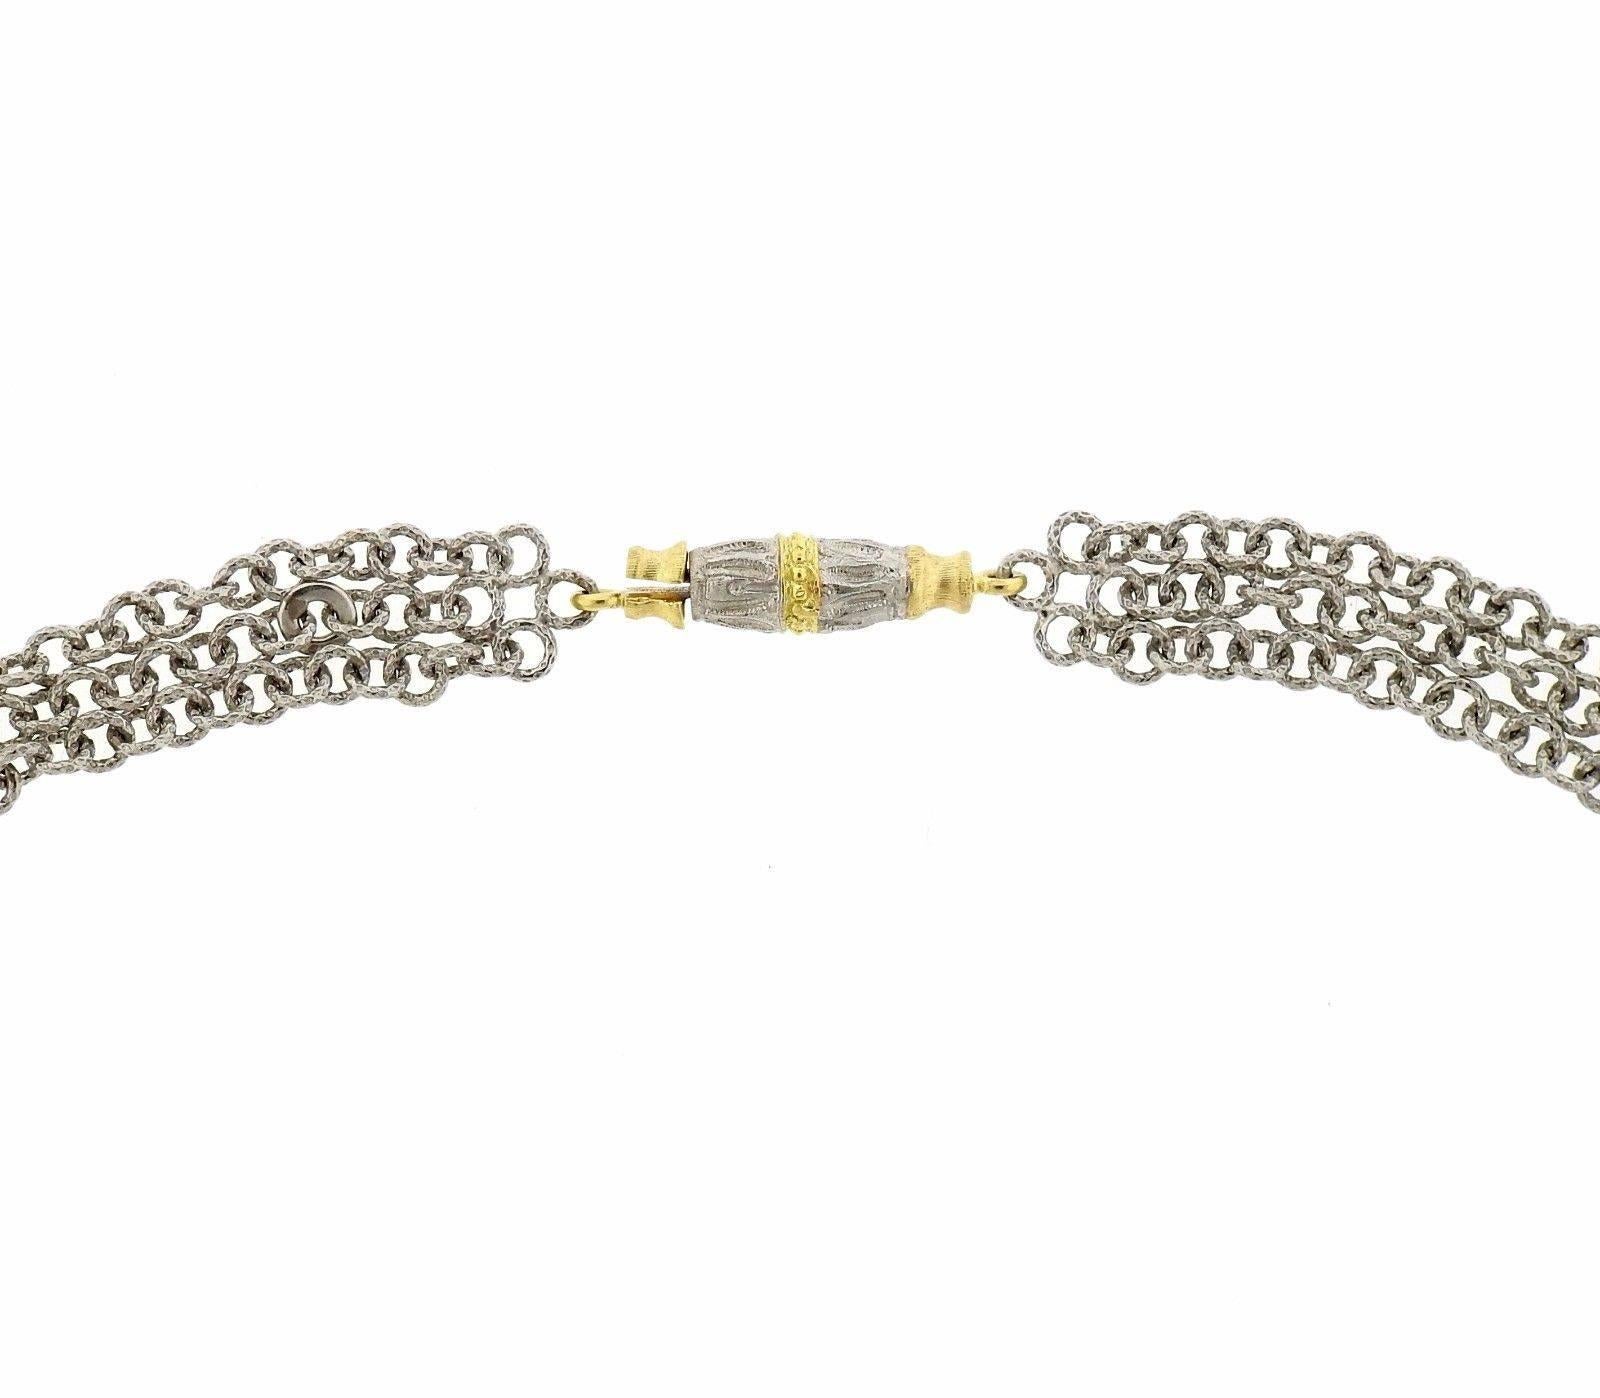 An 18k gold necklace set with approximately 2.54ctw of rose cut diamonds.  The shortest strand of the necklace measures 16.5" long and the stations are 4.65mm in diameter.  The weight of the piece is 26.8 grams.  Marked: Gianmaria Buccellati